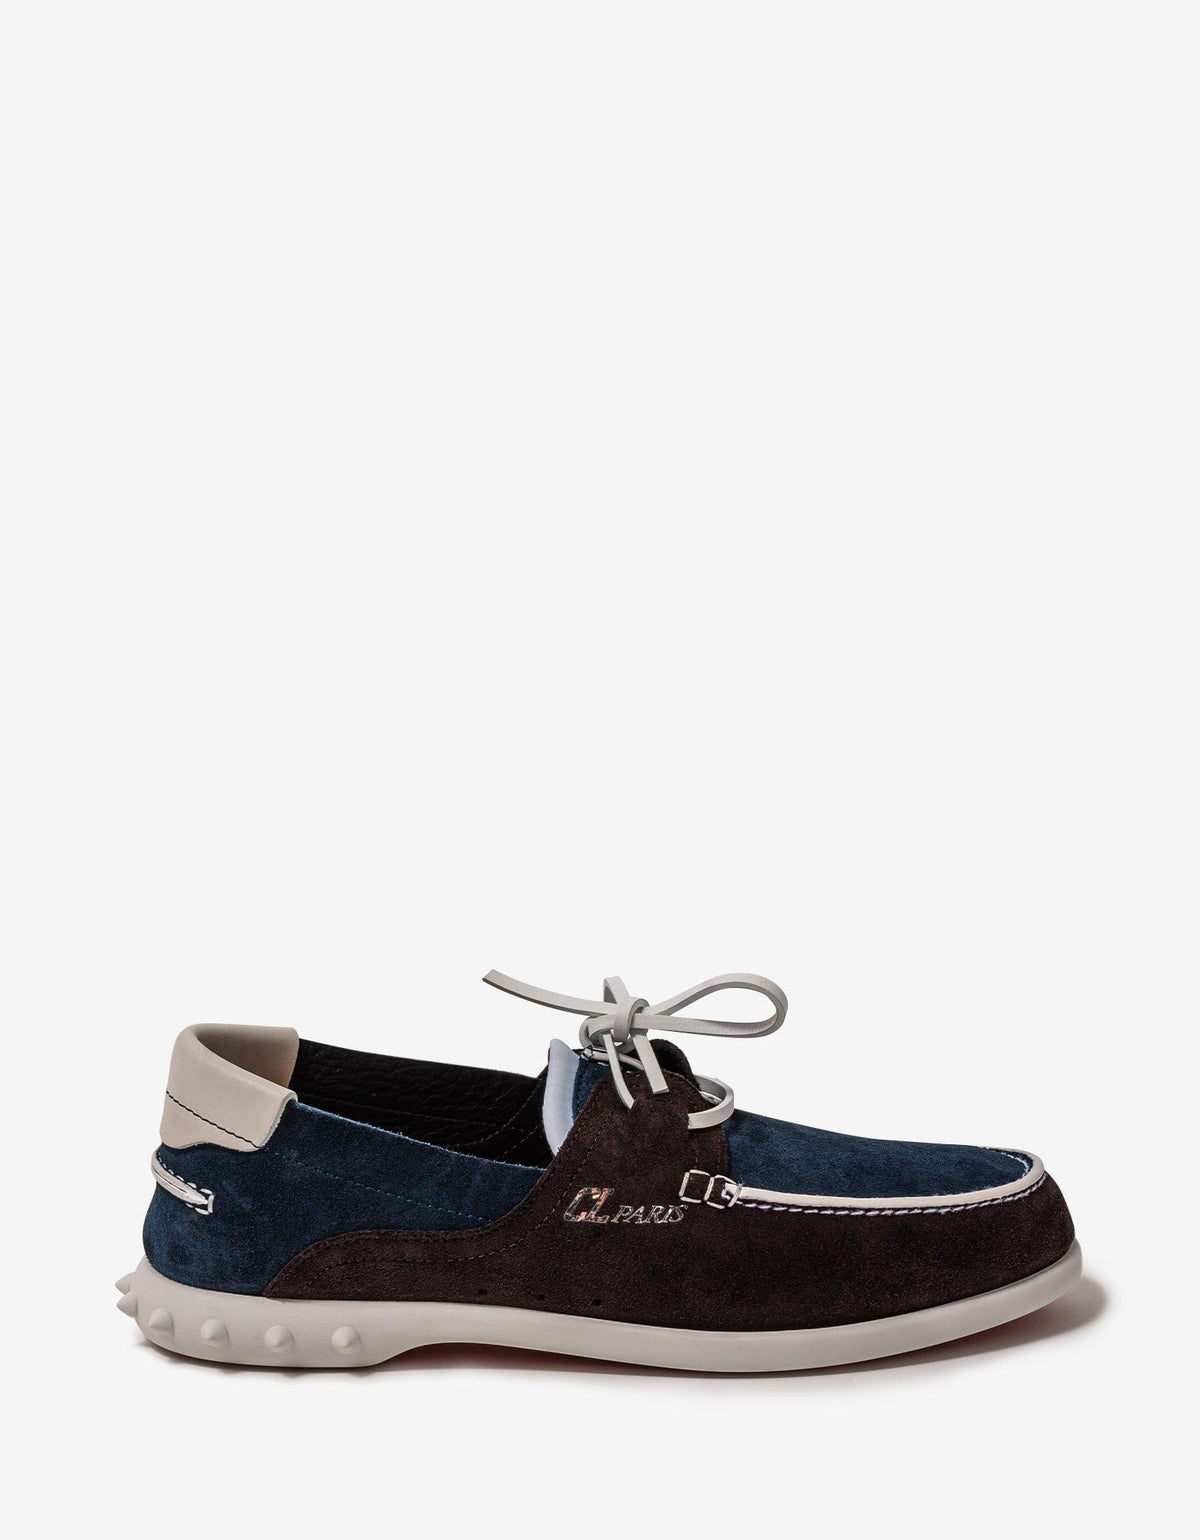 Christian Louboutin Geromoc Navy & Brown Suede Leather Loafer